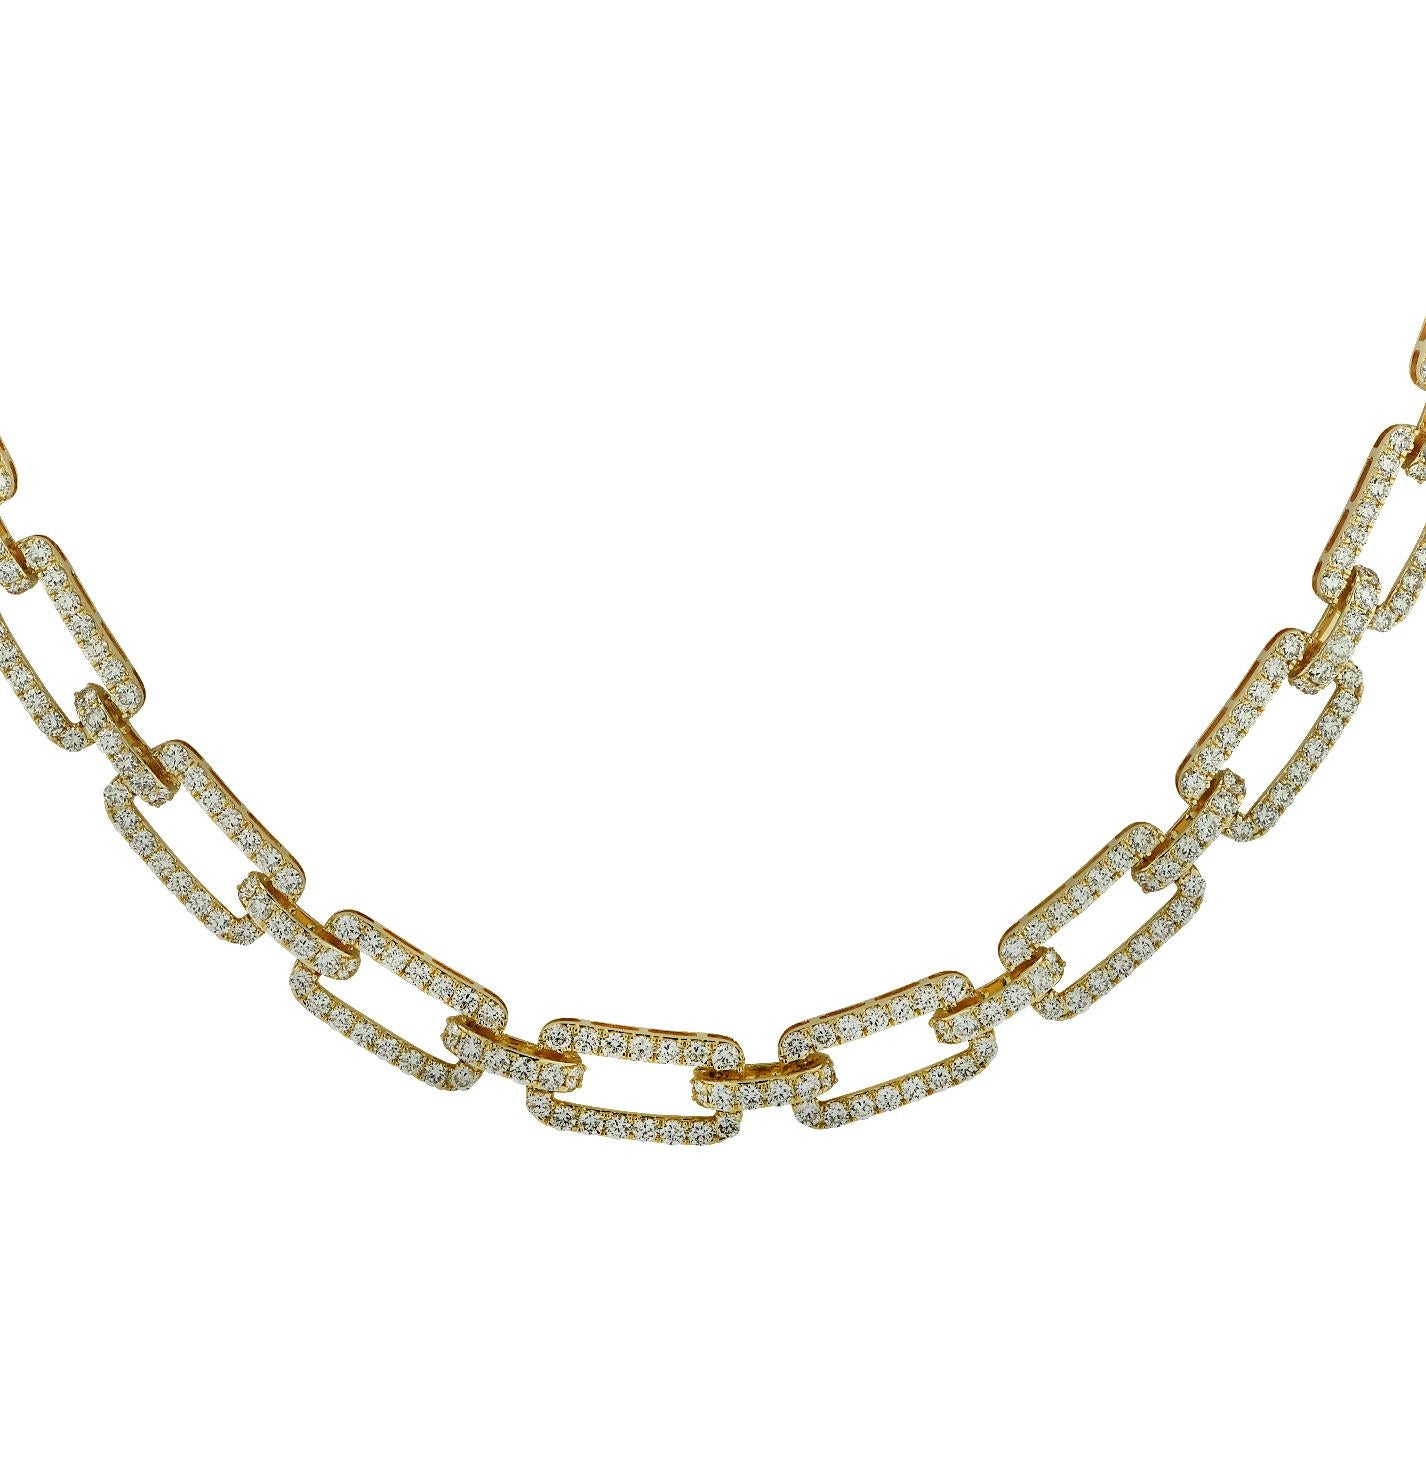 Stunning Vivid Diamonds diamond necklace crafted in yellow gold, featuring 541 round brilliant cut diamonds weigh 12.45 carats total, G-H color, SI clarity. Diamond encrusted open links join to create a spectacular display of brilliance and fire.